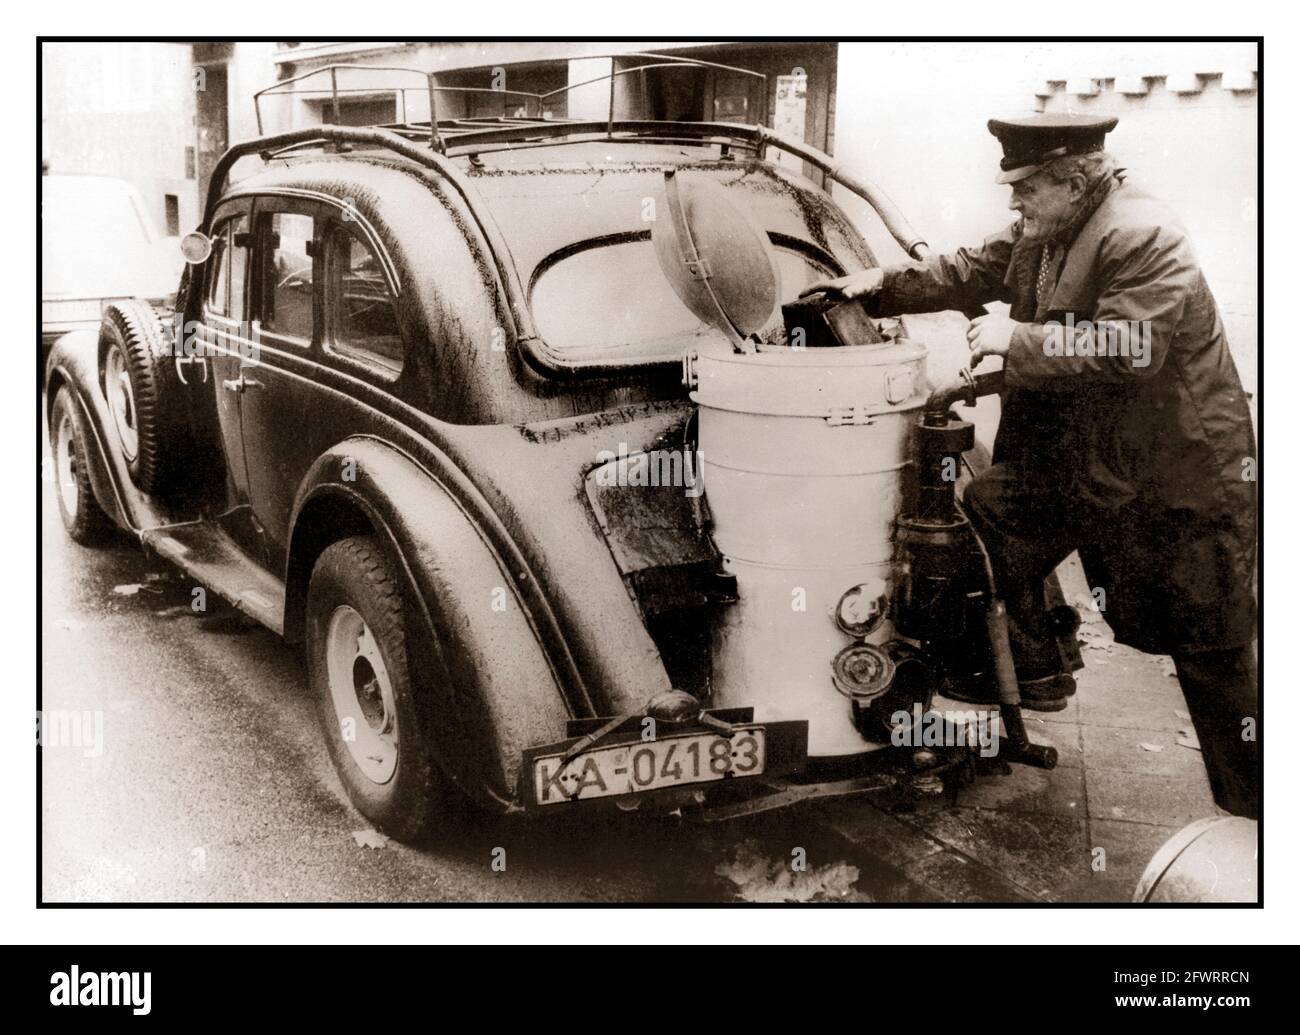 WAR FUEL CRISIS Vintage WW2 German 1936 Adler Diplomat car, with its innovative fuel that uses wood instead of petrol, fitted during World War II. Second World War saving fuel for the war effort Nazi Germany Stock Photo